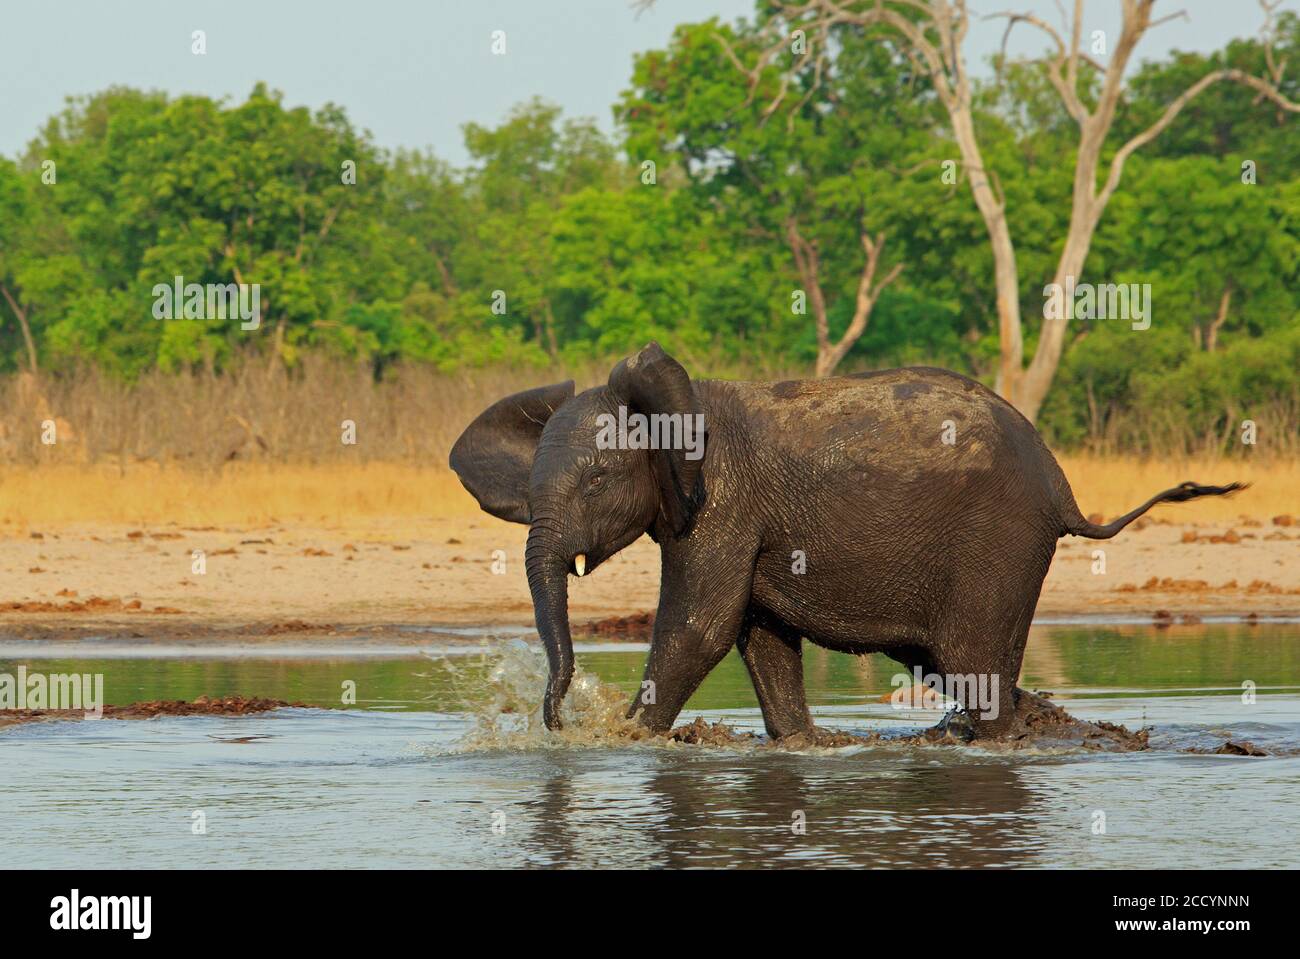 A young Elephant stampeding through a small waterhole with water splashing and trunk swaying with a natural vibrant green bush background Stock Photo